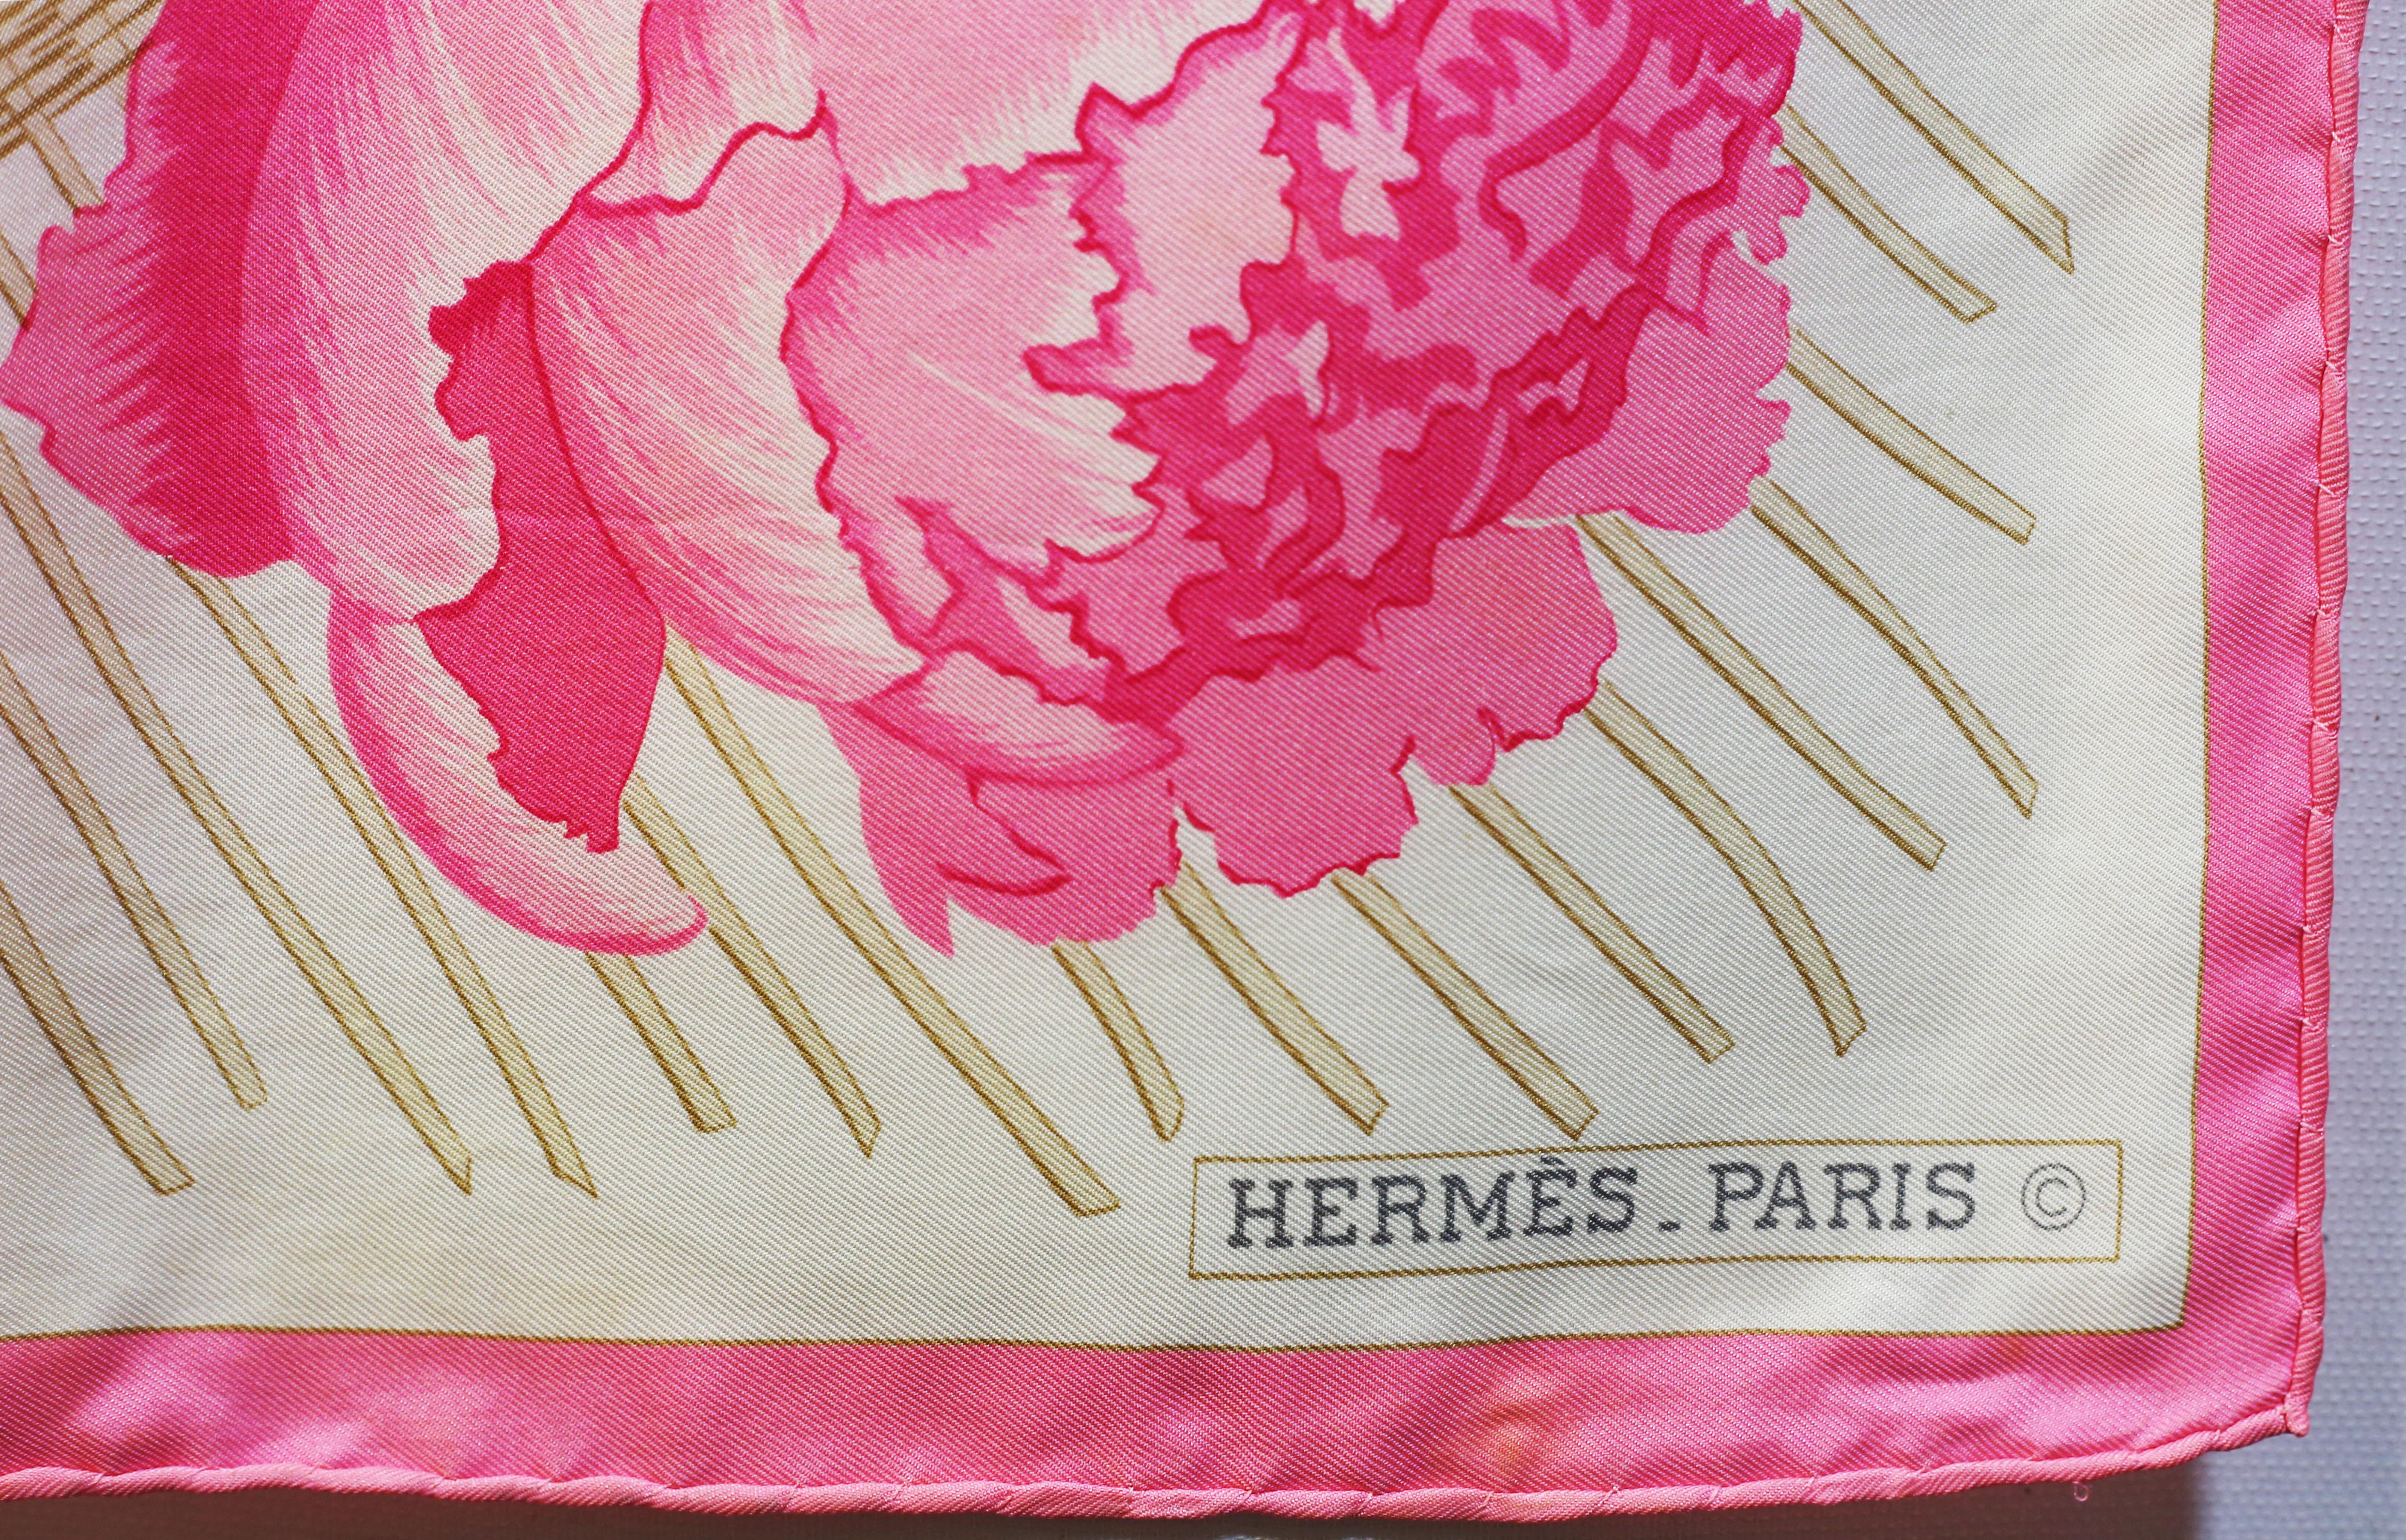 HERMES Scarf  Silk Scarf 100%  Paris, Made In France 
Les Pivoines Hermes silk twill scarf (100% silk) - Preowned
Designed by Christiane Vauzelles in 1978 


*Orders welcome  all goods are insured and we package all purchases to a high